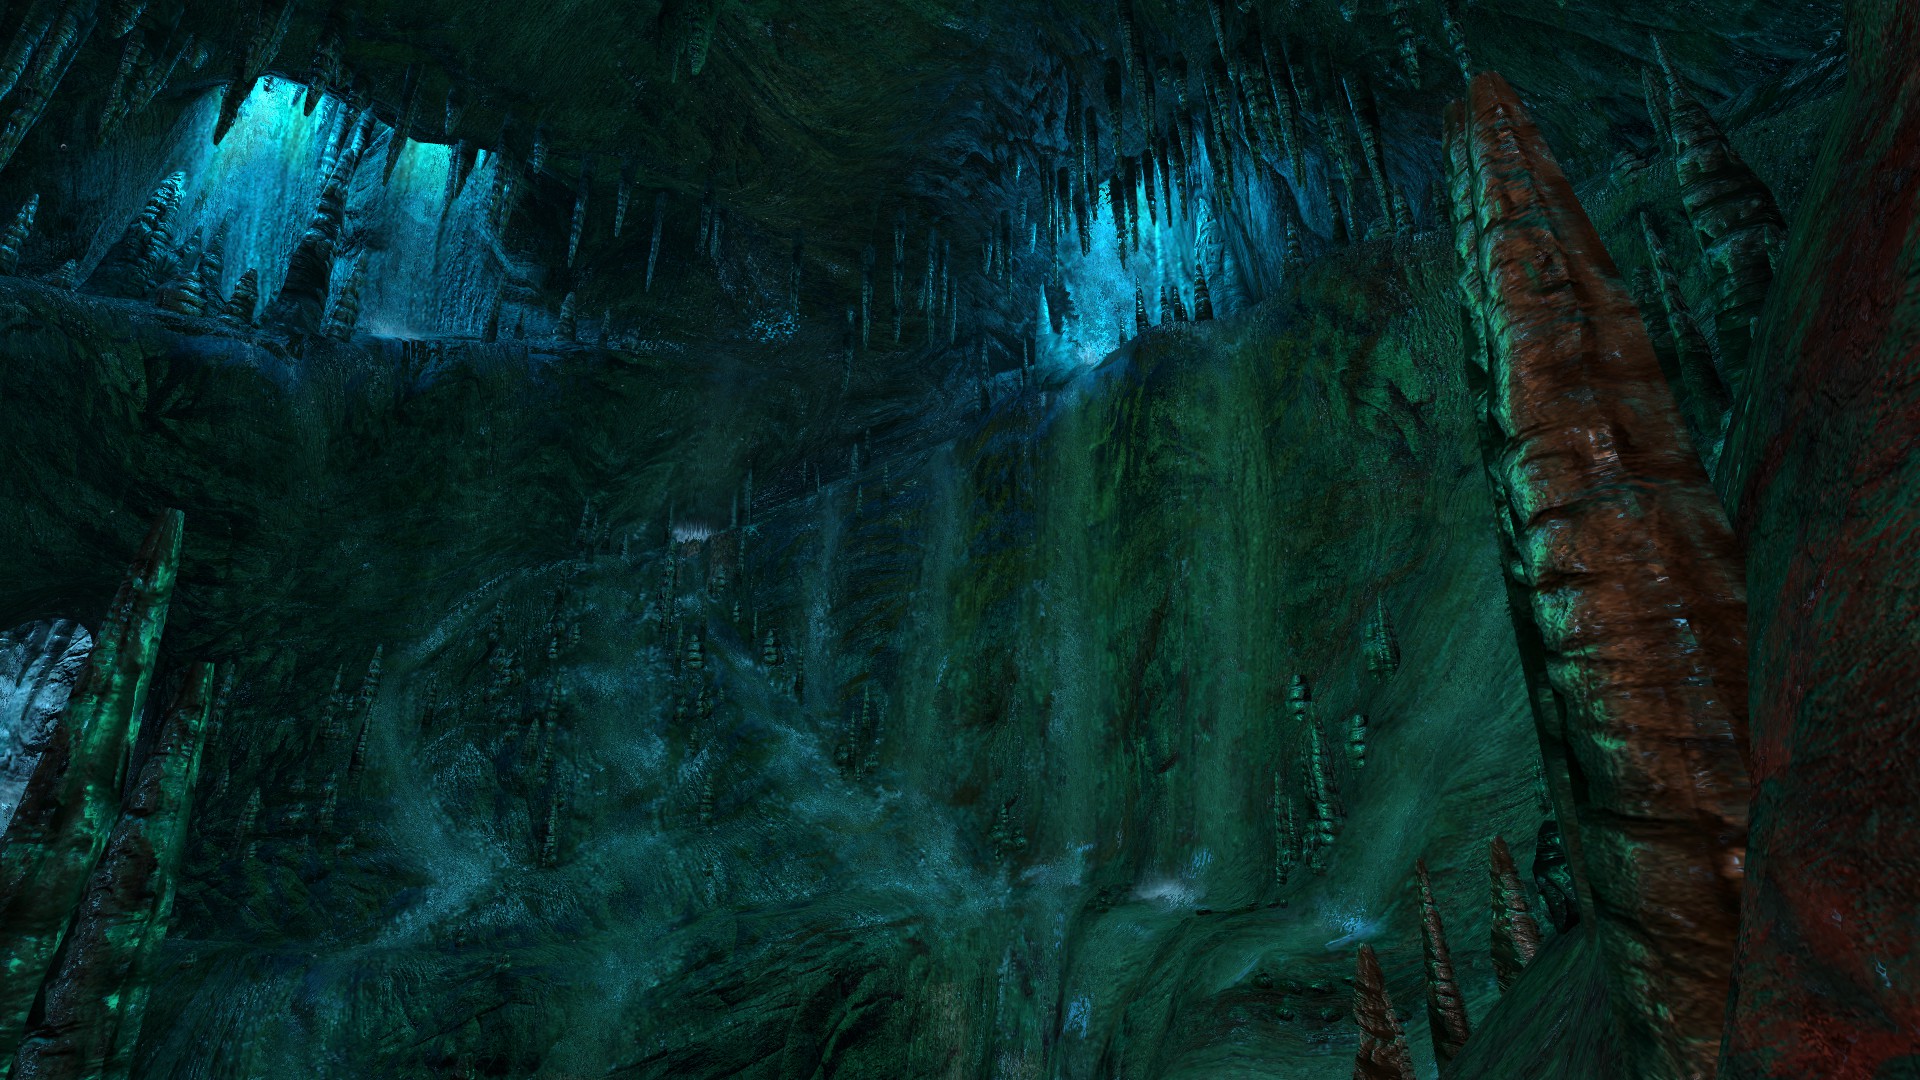 Water running down the inside of an overworldly cave